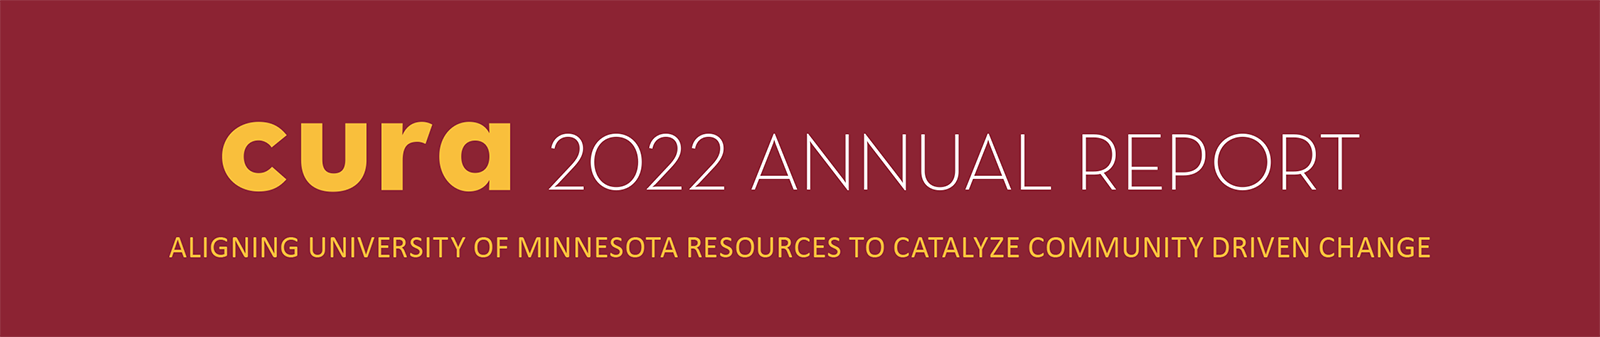 cUrd 2022 ANNUAL REPORT ALIGNING UNIVERSITY OF MINNESOTA RESOURCES TO CATALYZE COMMUNITY DRIVEN CHANGE